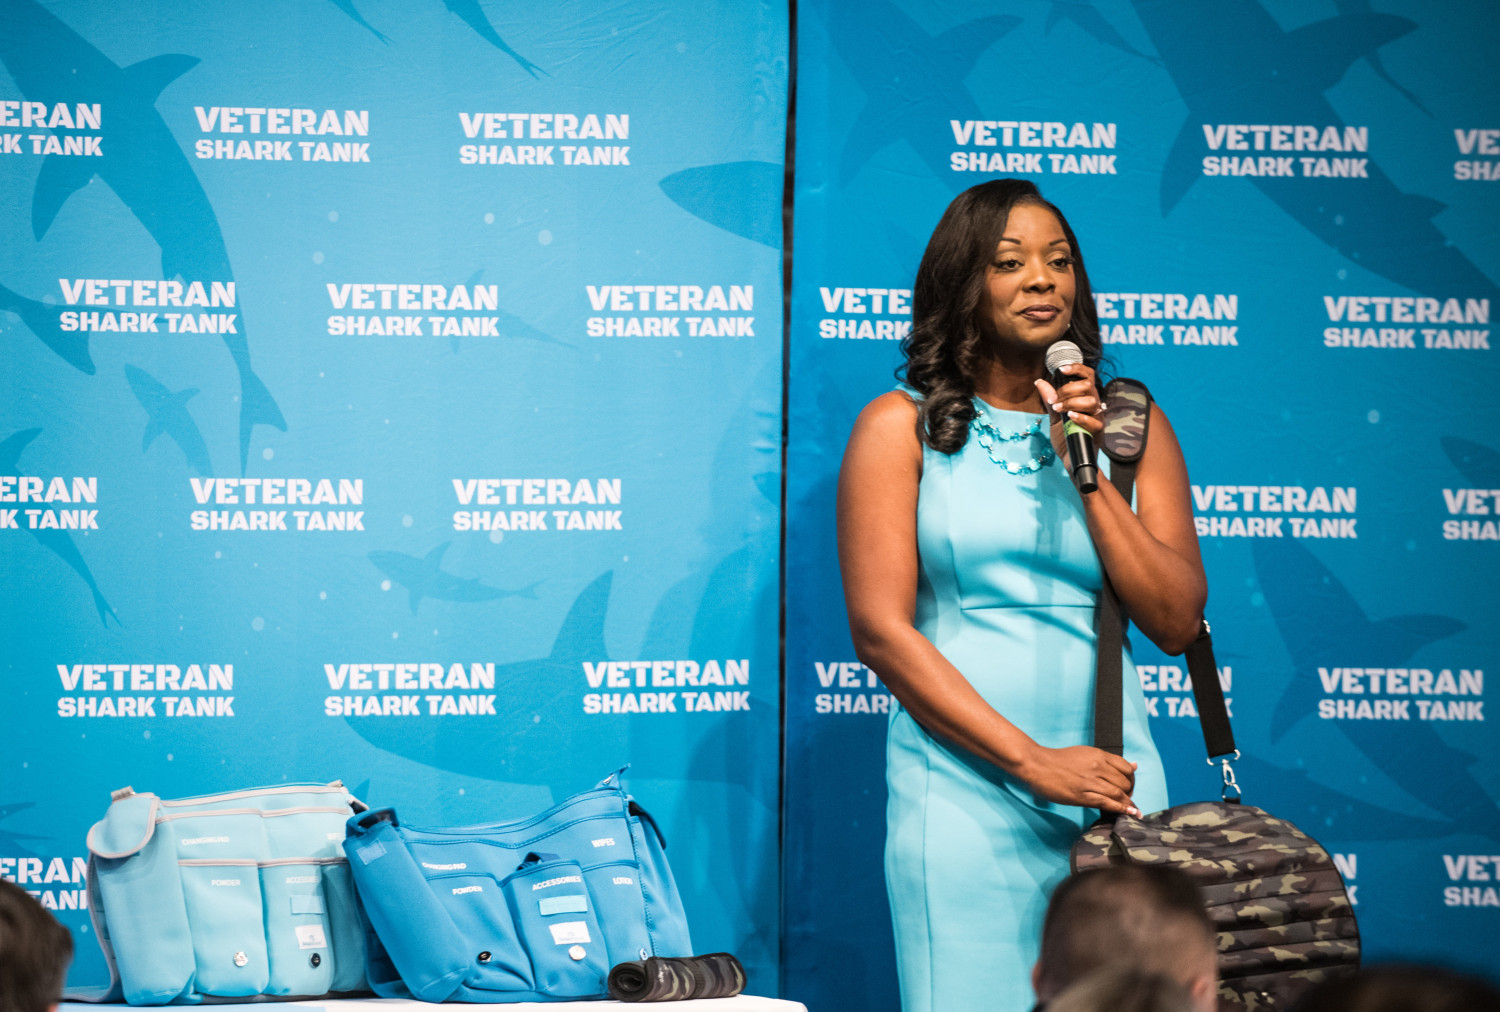 https://media-cldnry.s-nbcnews.com/image/upload/t_fit-1500w,f_auto,q_auto:best/newscms/2019_50/3141621/candace_sparks_with_a_baby_bedside_bag_during_her_presentation_1.jpg